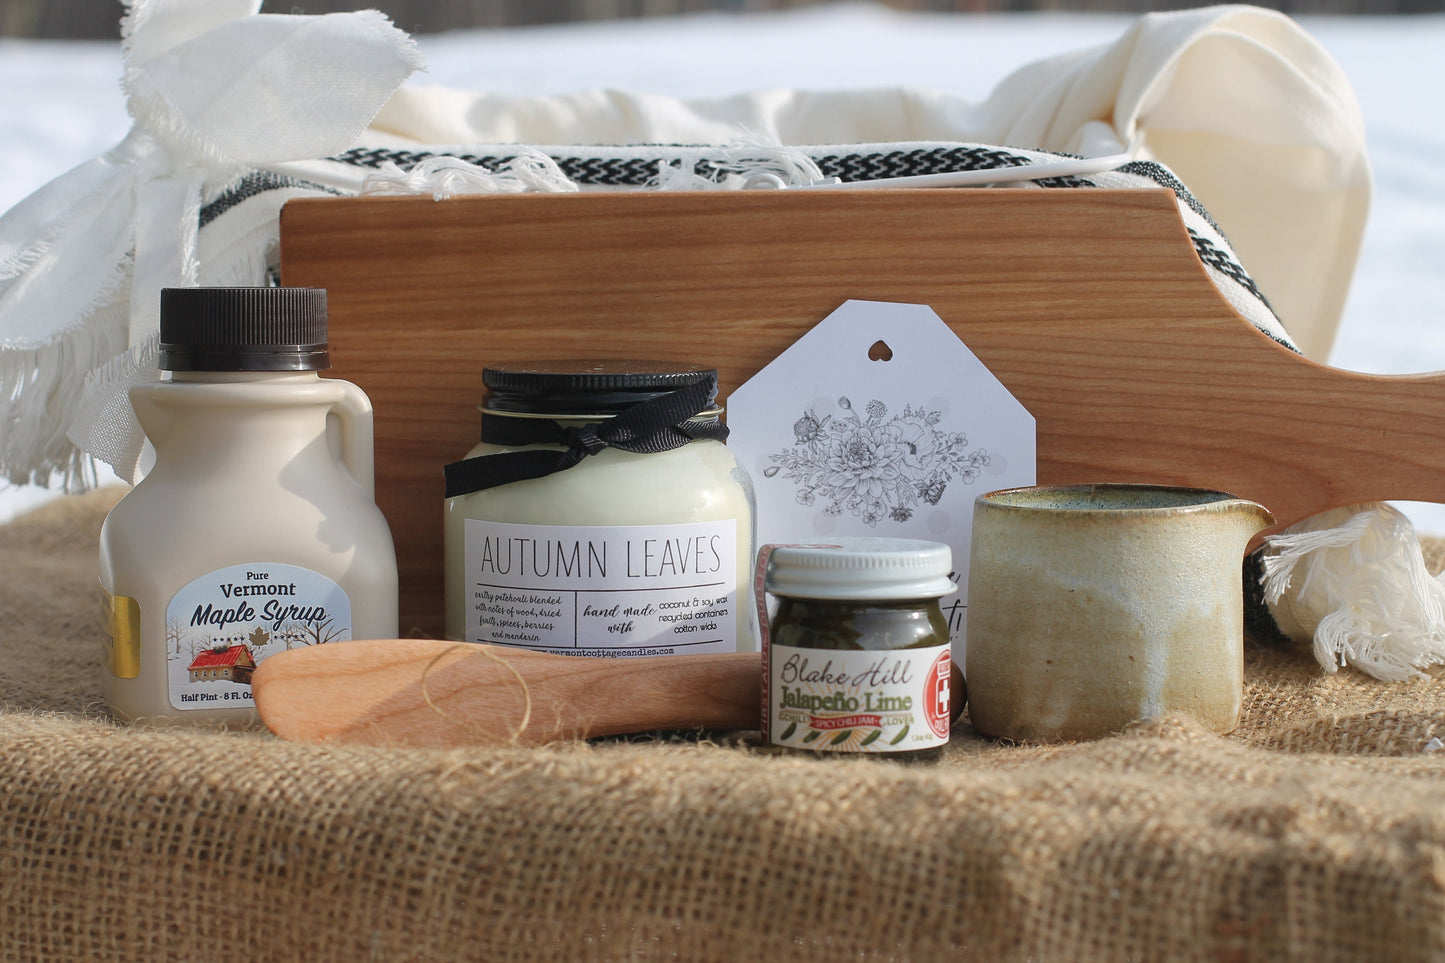 Vermont Artisan Gift Collection, Heirloom Quality Handcrafted Gift Set, Best of Vermont